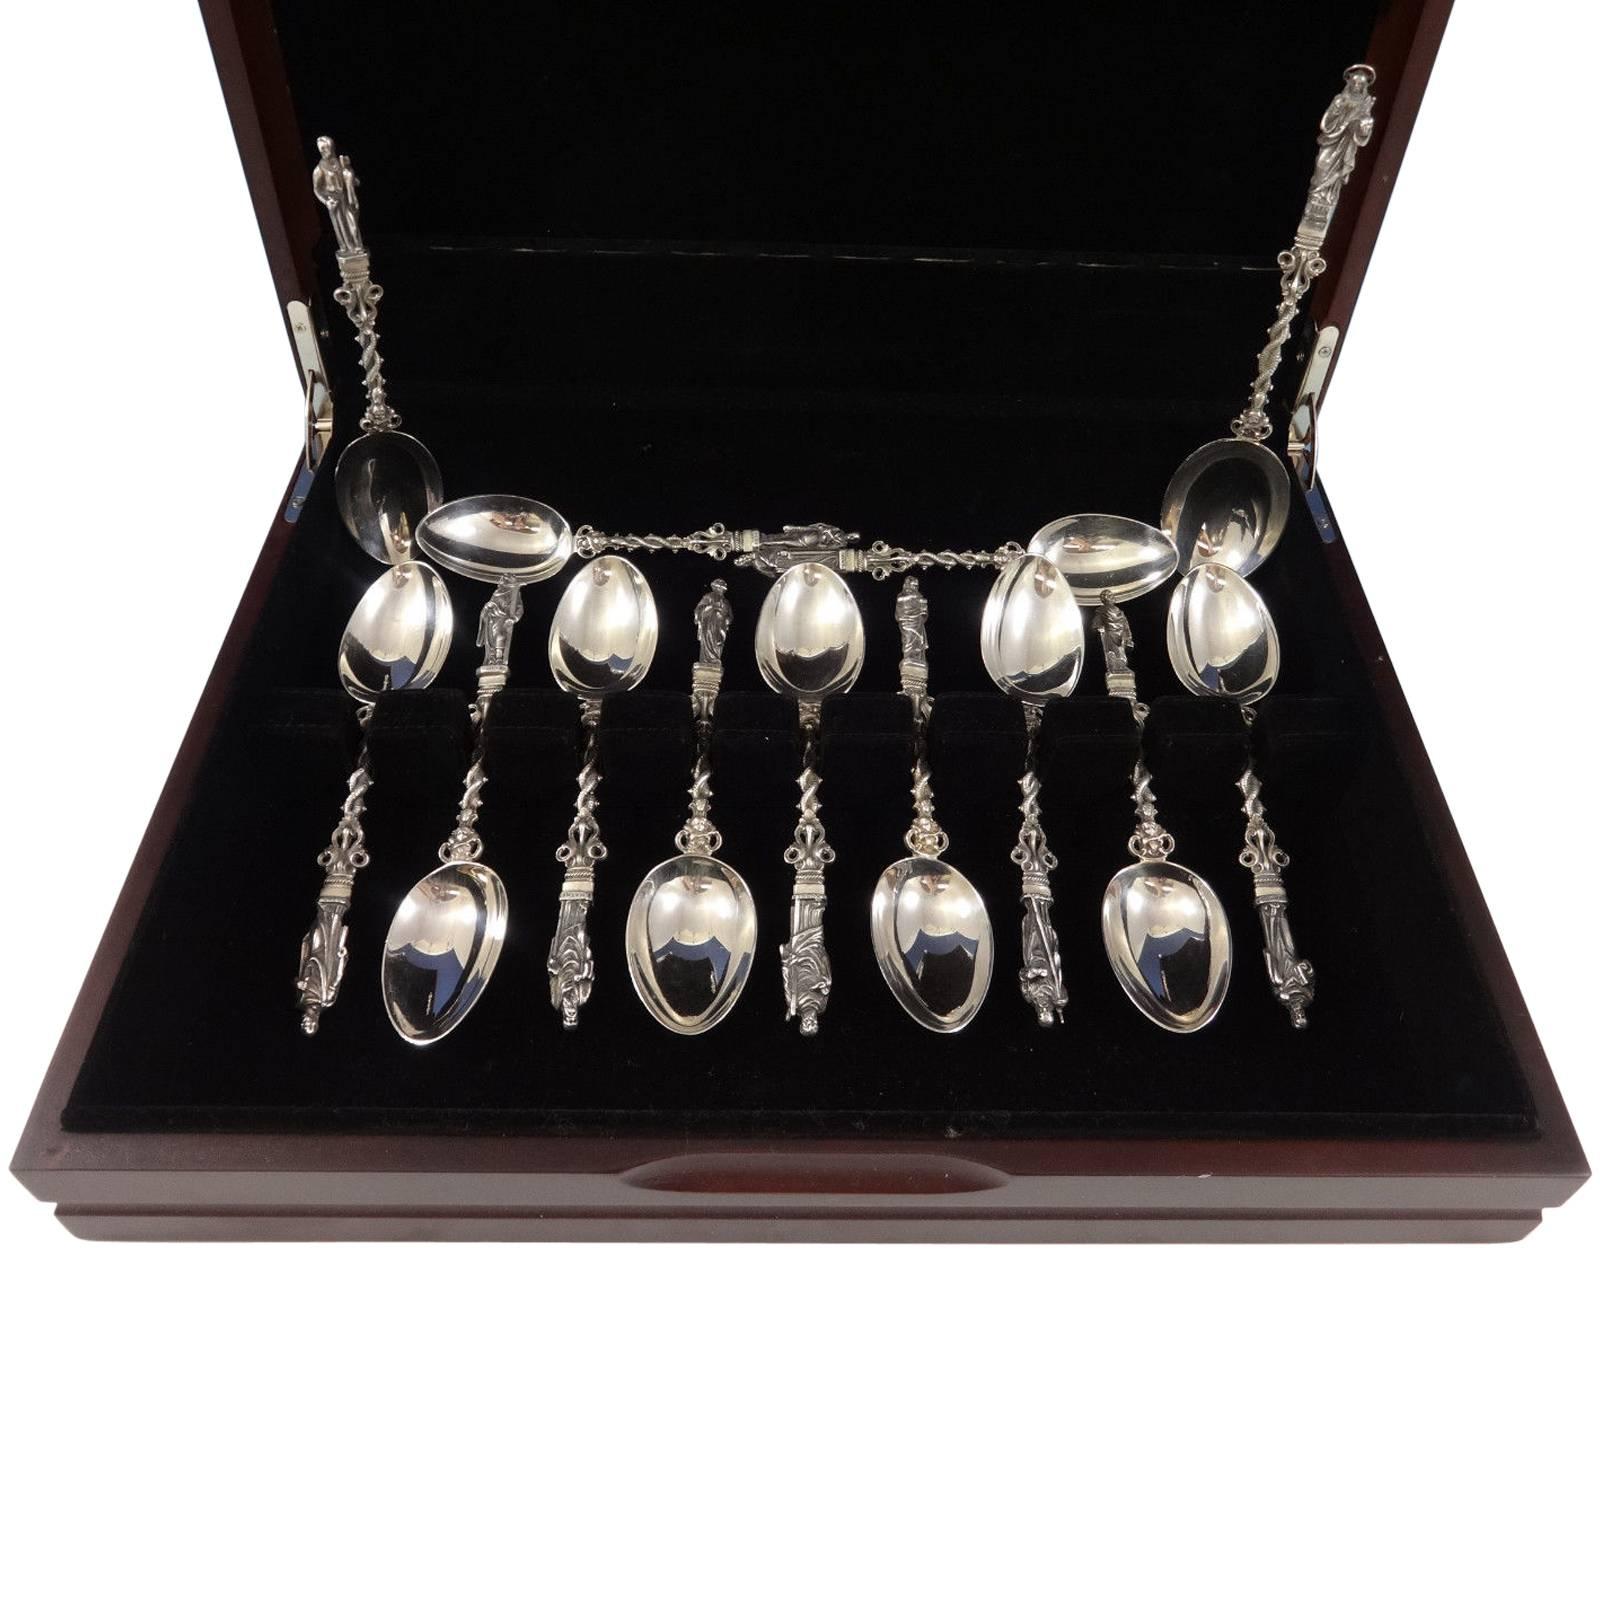 Apostles by Gorham Sterling Silver Figural Dessert 13 Spoon Set Exceptional RARE